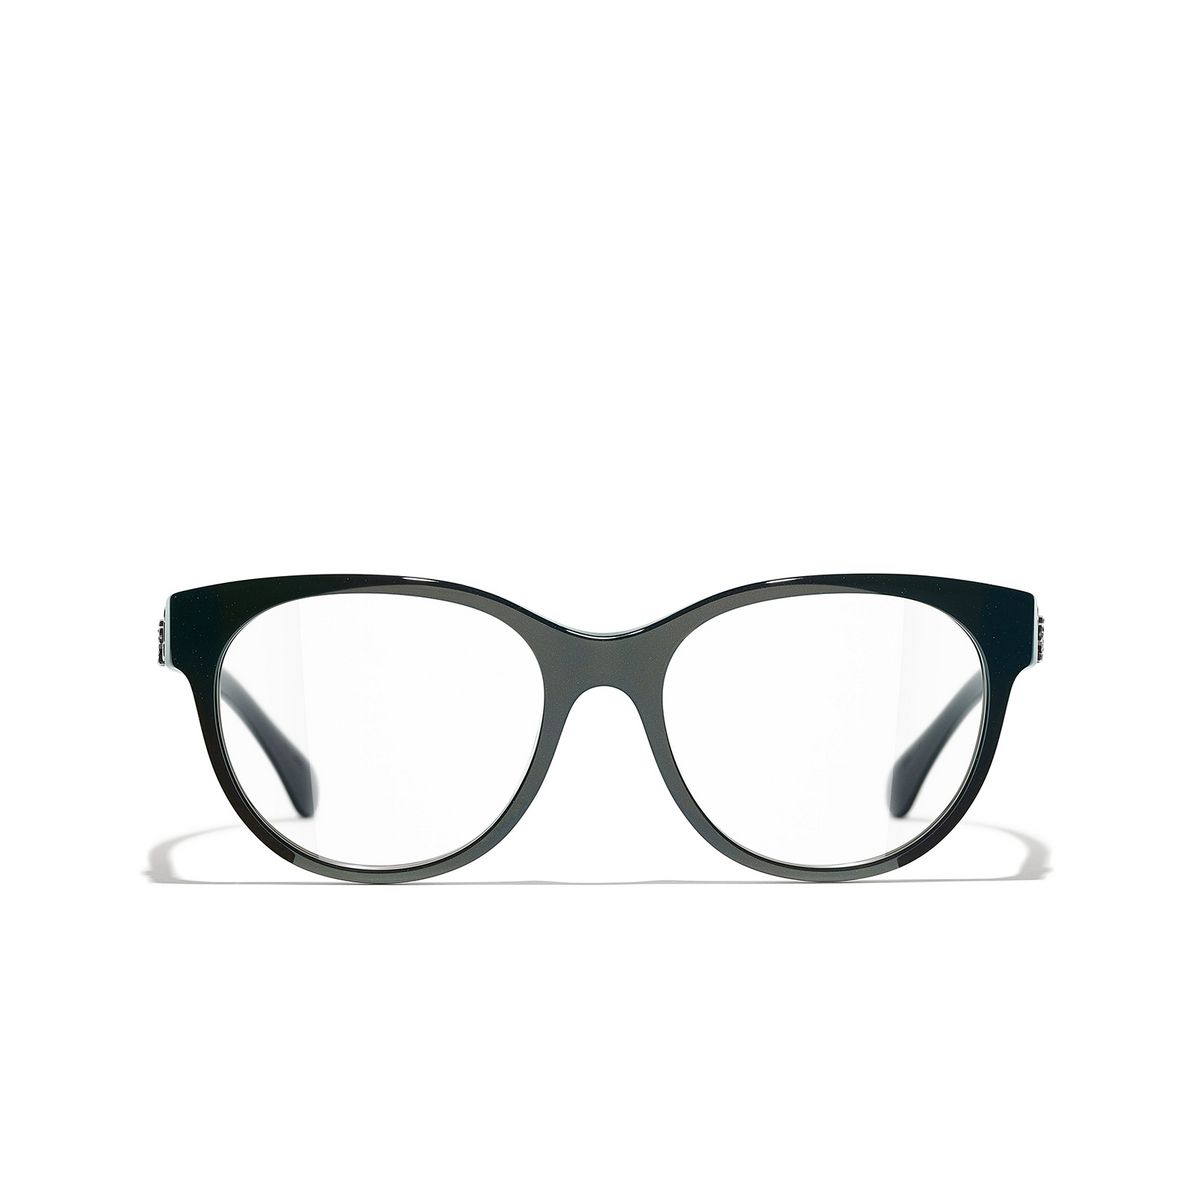 CHANEL butterfly Eyeglasses 1707 Green - front view